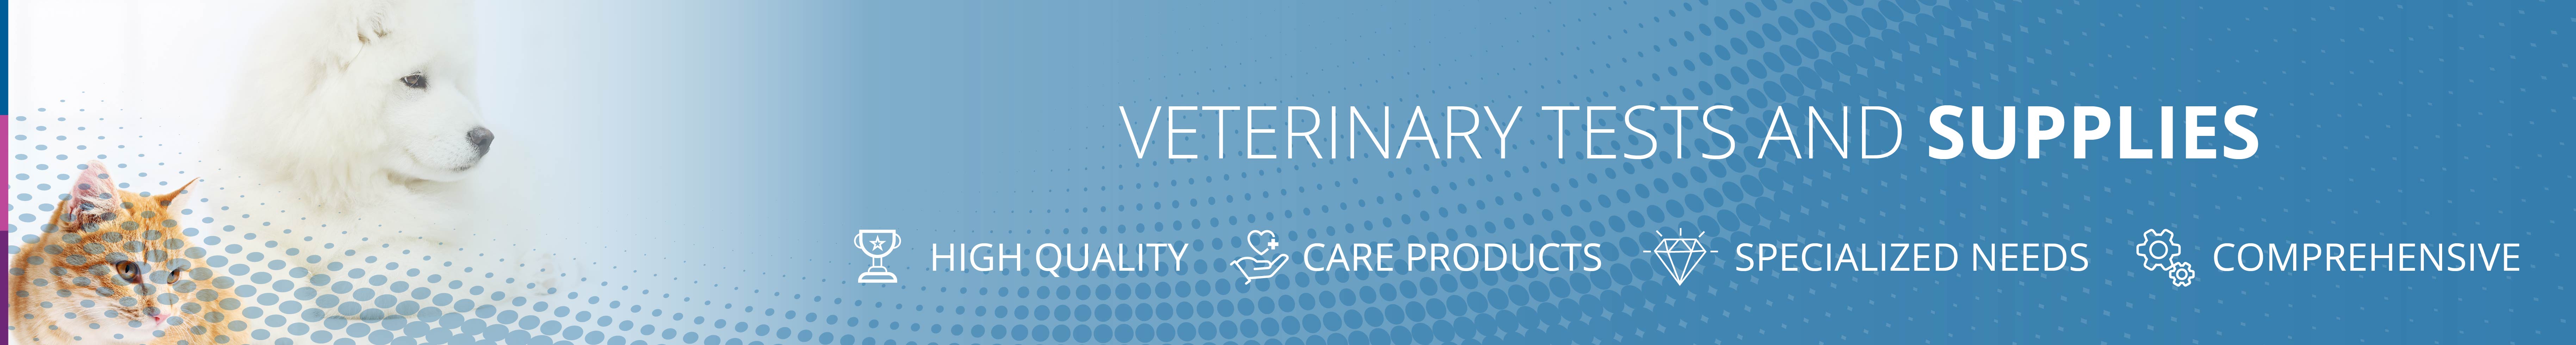 Veterinary Tests & Supplies